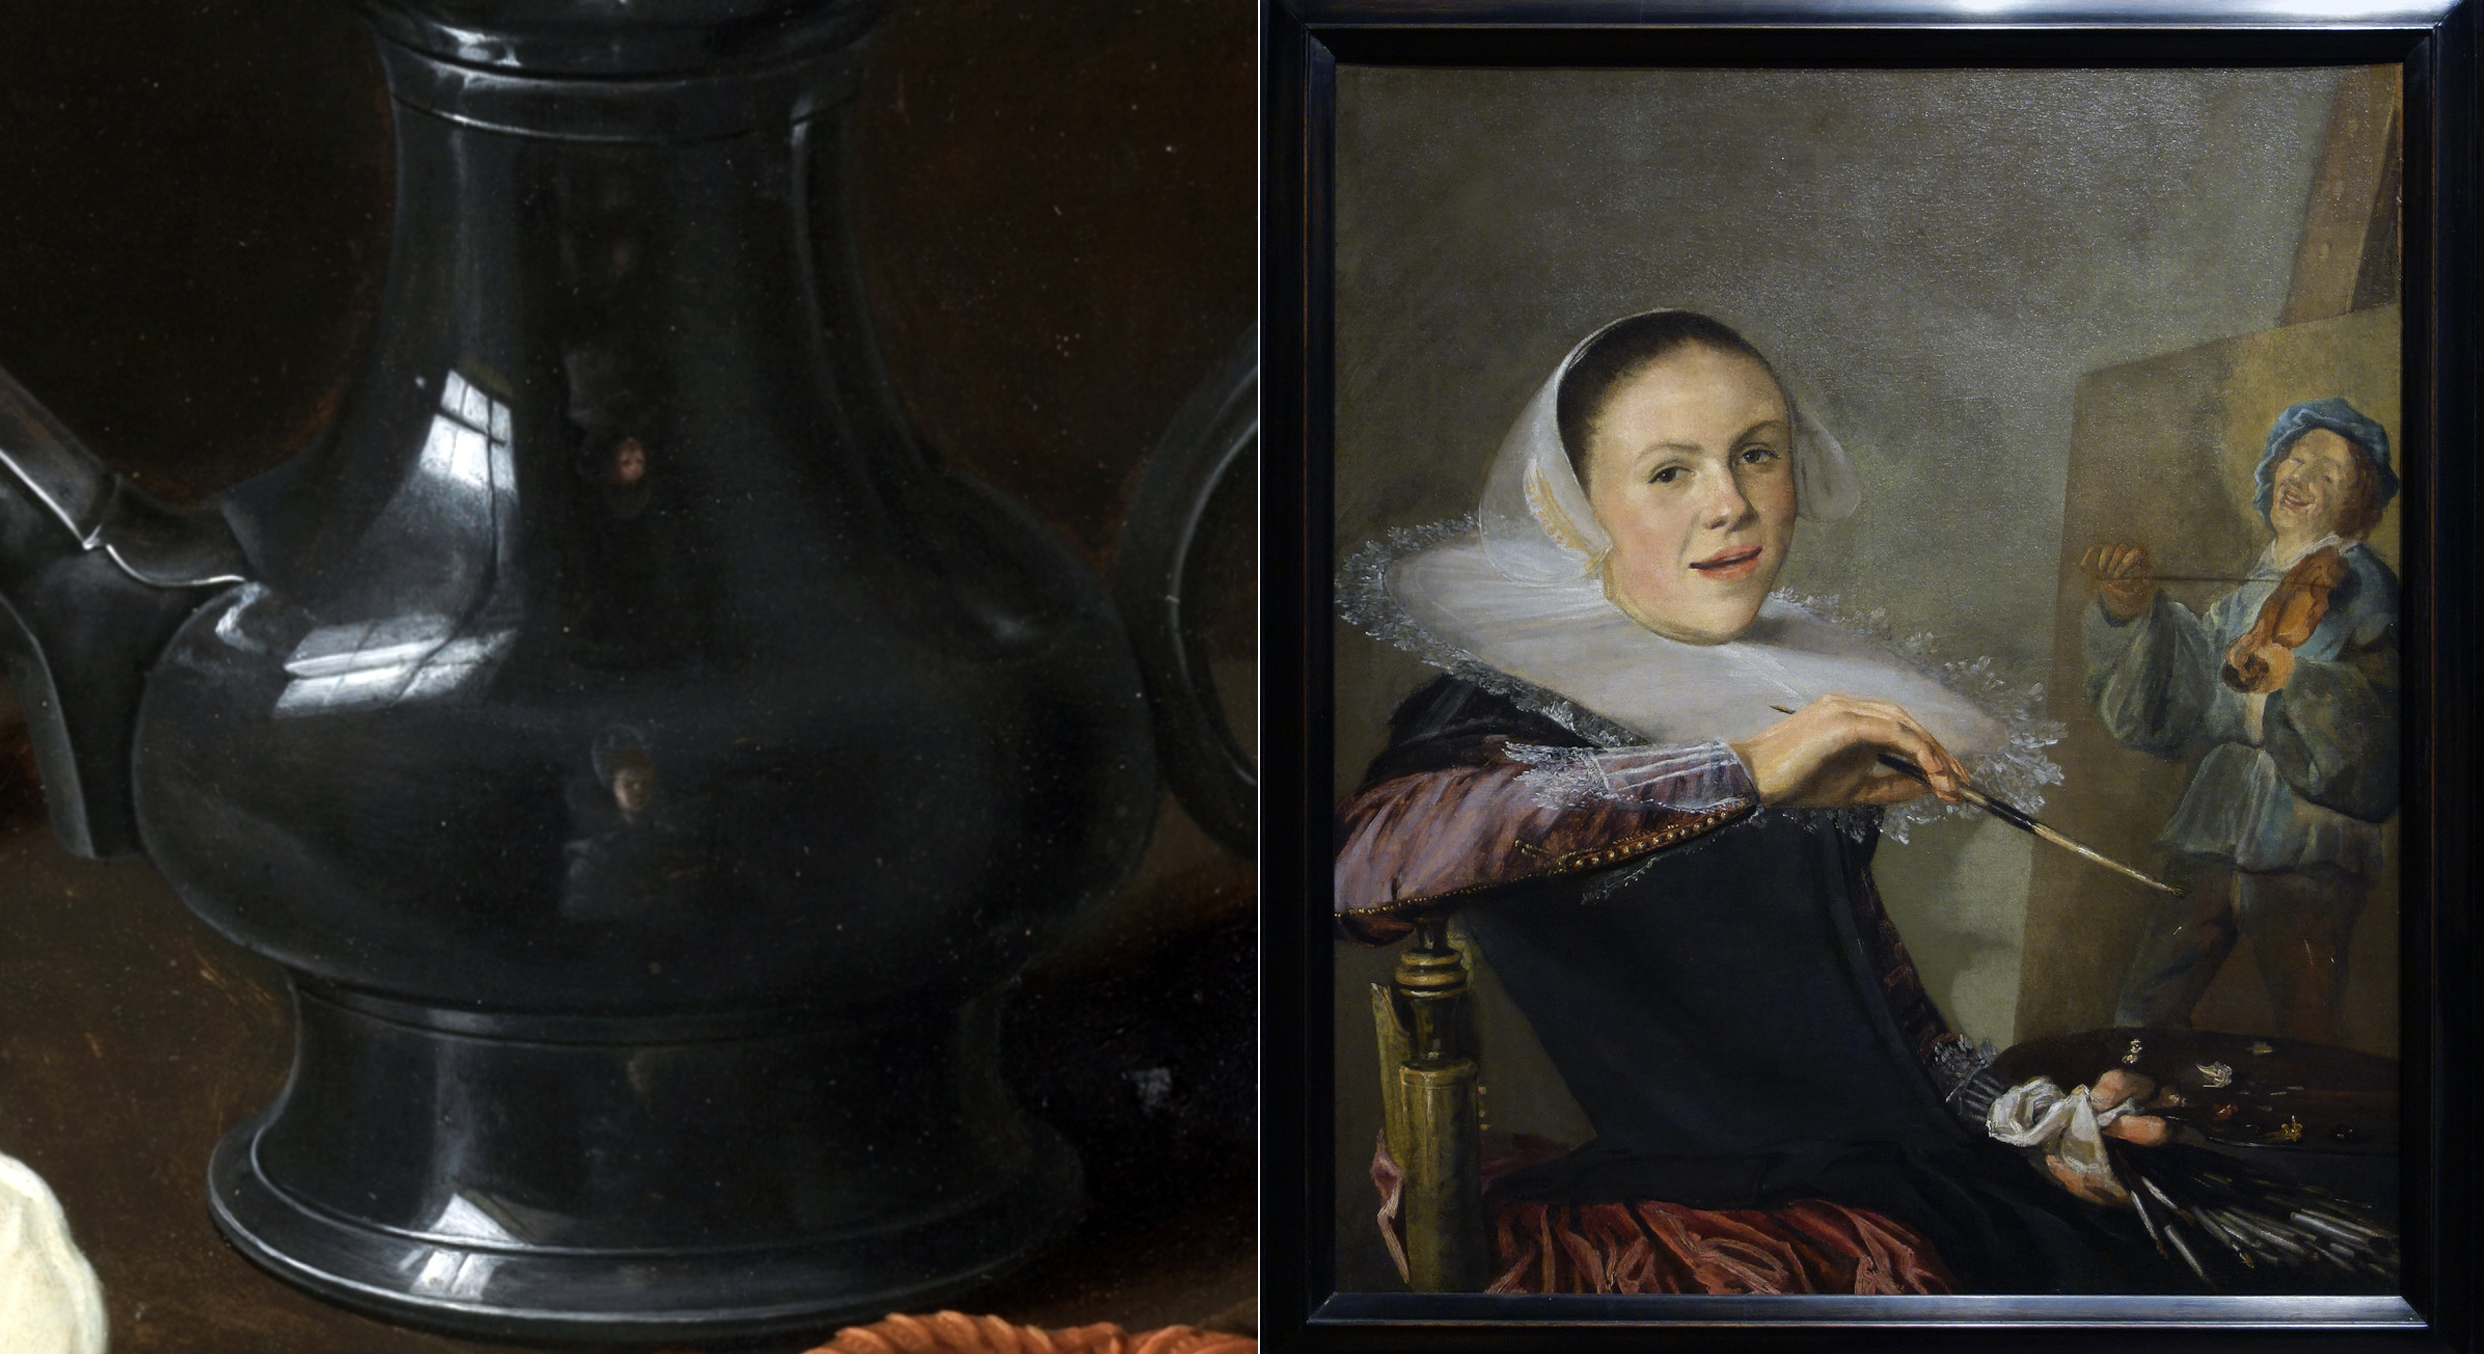 Left: Clara Peeters, Still Life with flowers, a silver-gilt goblet, almonds, dried fruit, sweetmeats, bread sticks, wine and a pewter pitcher, 1611, oil on panel, 52 x 73 cm (Museo del Prado, Madrid); right: Judith Leyster, Self-Portrait, c. 1633, oil on canvas, 74.6 x 65.1 cm (National Gallery of Art, Washington D.C.; photo: Steven Zucker, CC BY-NC-SA 2.0)